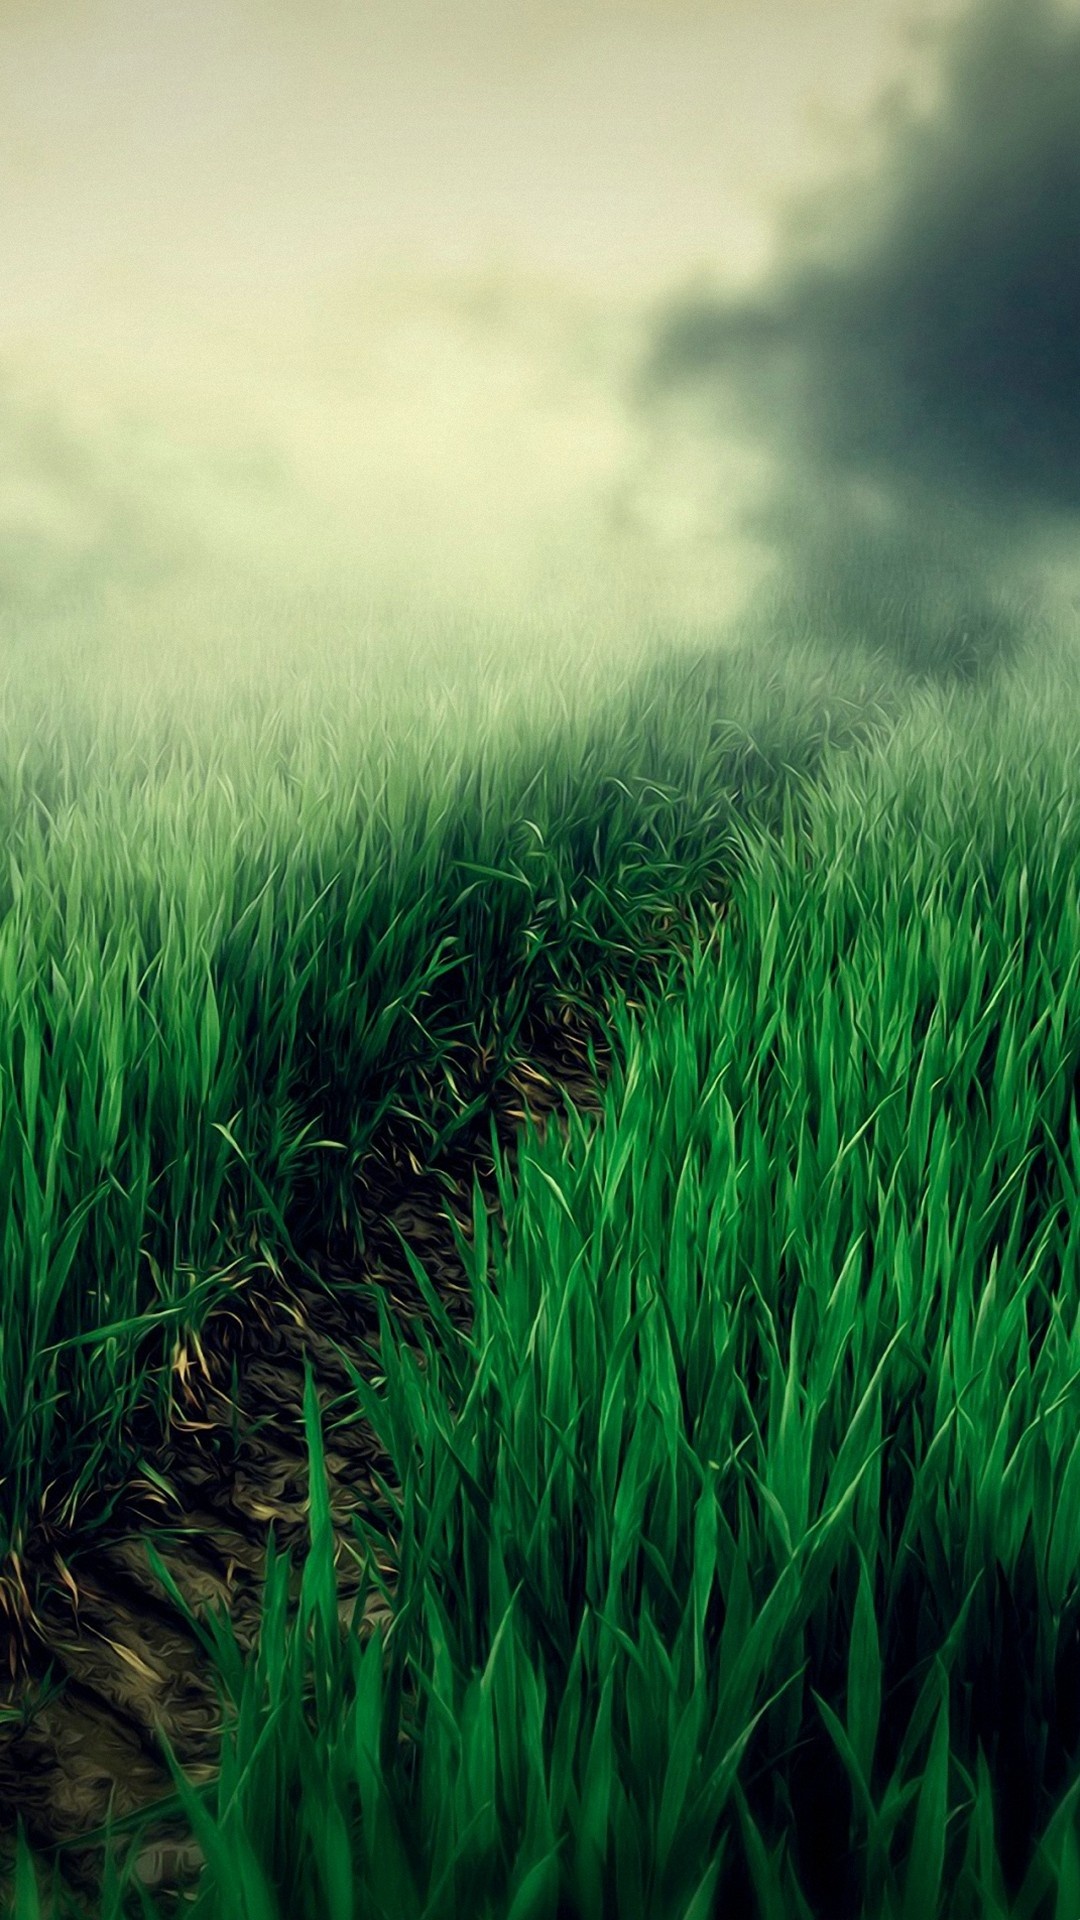 Grass wallpapers, Green nature, Vibrant landscapes, Natural textures, 1080x1920 Full HD Handy